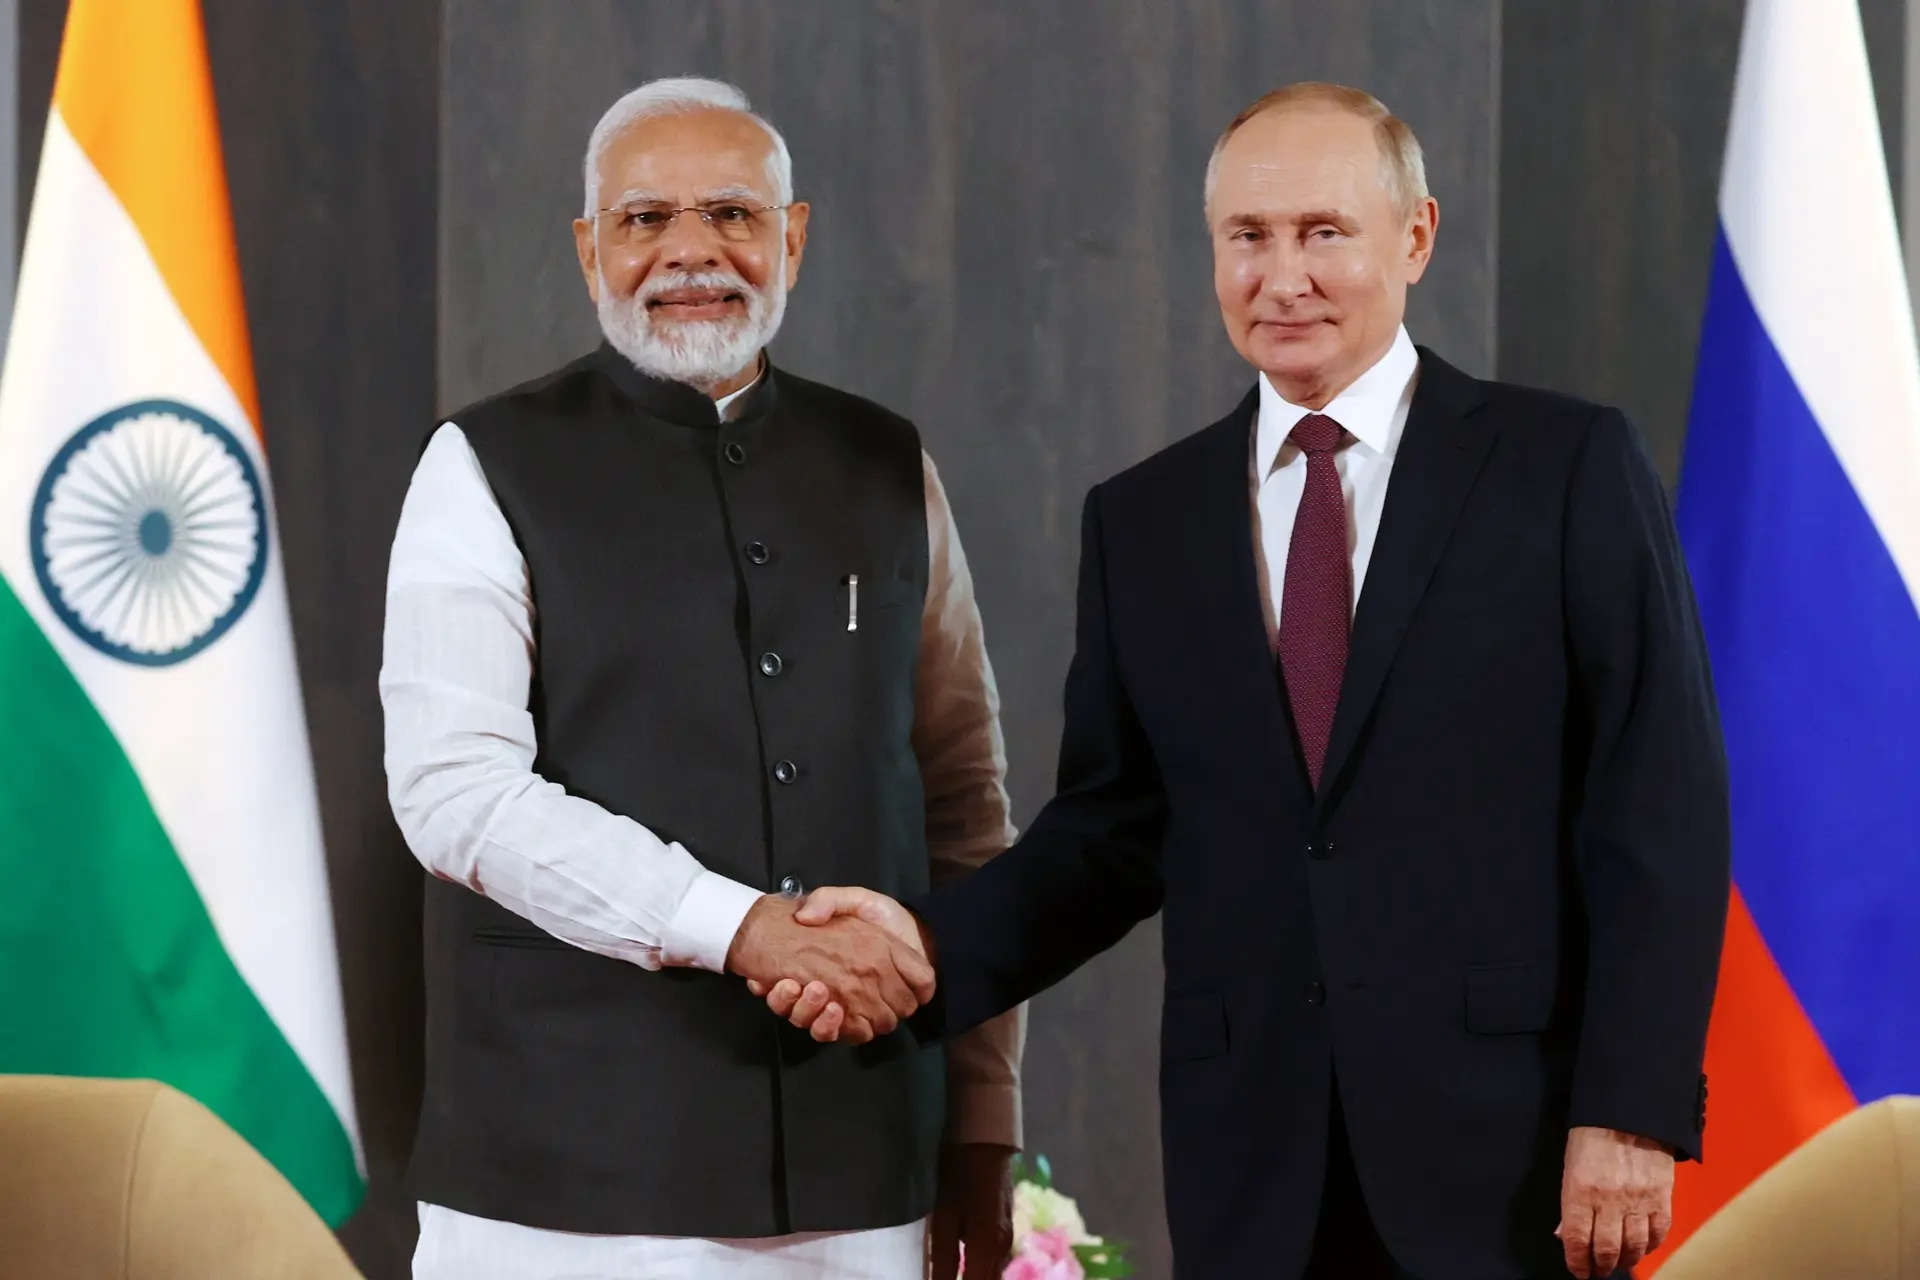 Looking forward to review all aspects of India-Russia ties with President Putin: PM Modi 